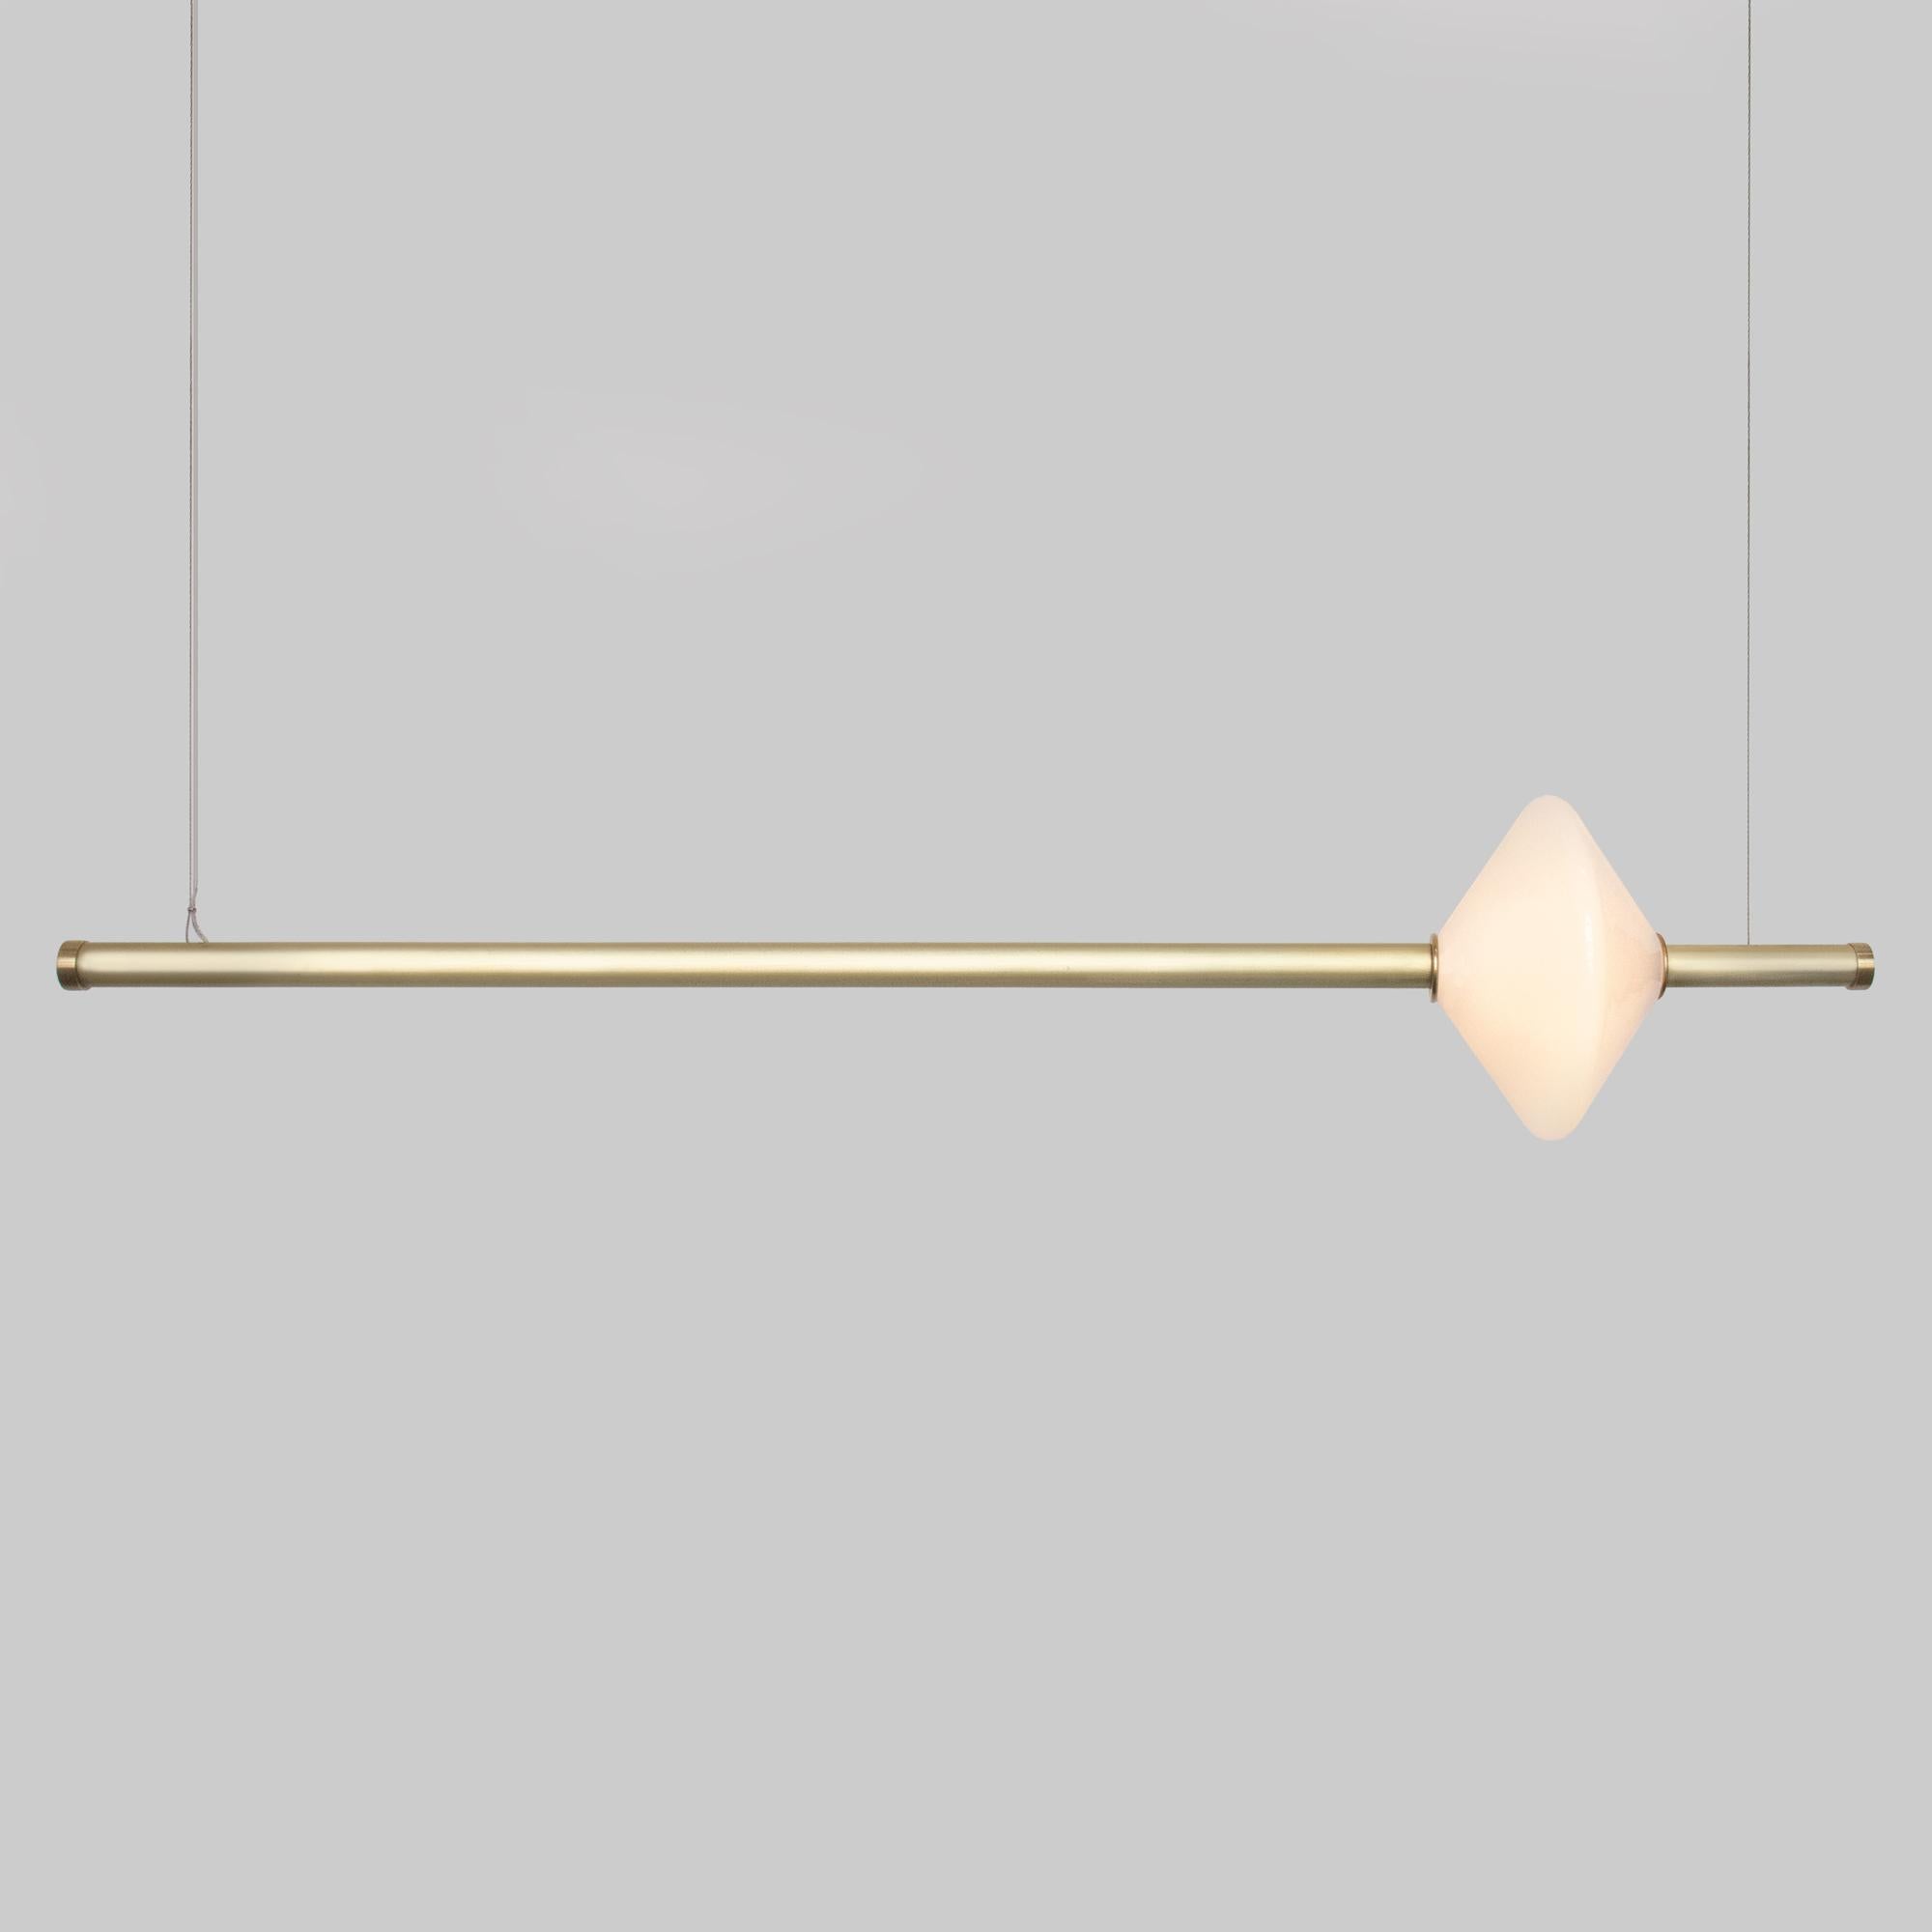 The GEM 1 Linear Pendant is built of brass with an LED light source that is diffused by a hand-blown opal white glass diffuser. This pendant works as an individual fixture or can be installed in larger groupings to create a dynamic installation. Use